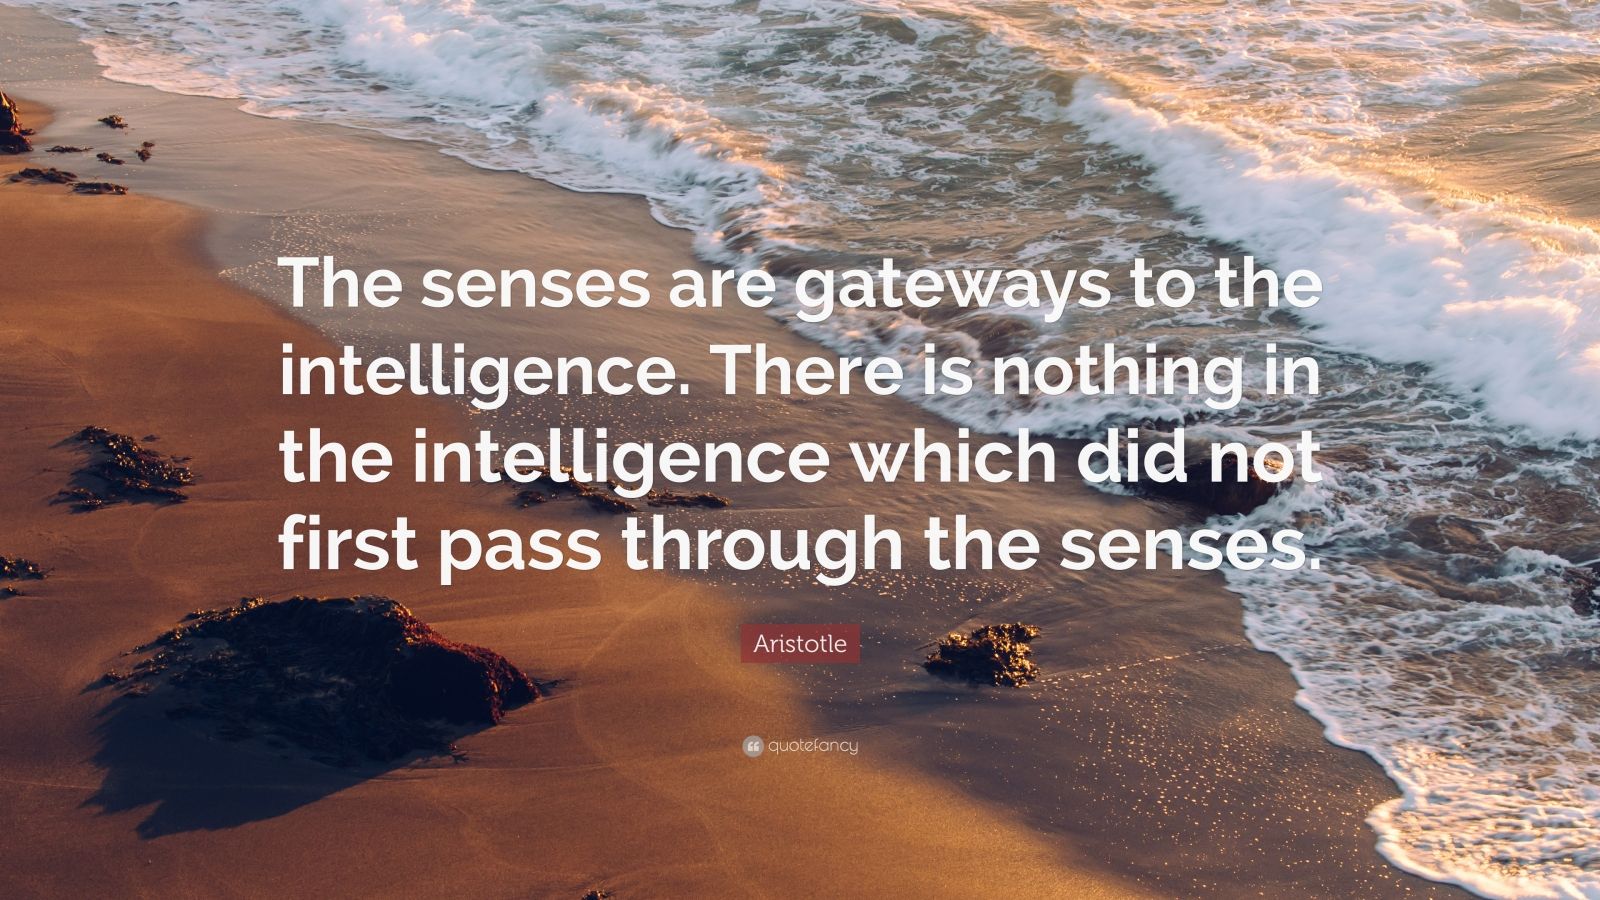 Aristotle Quote: “The senses are gateways to the intelligence. There is ...